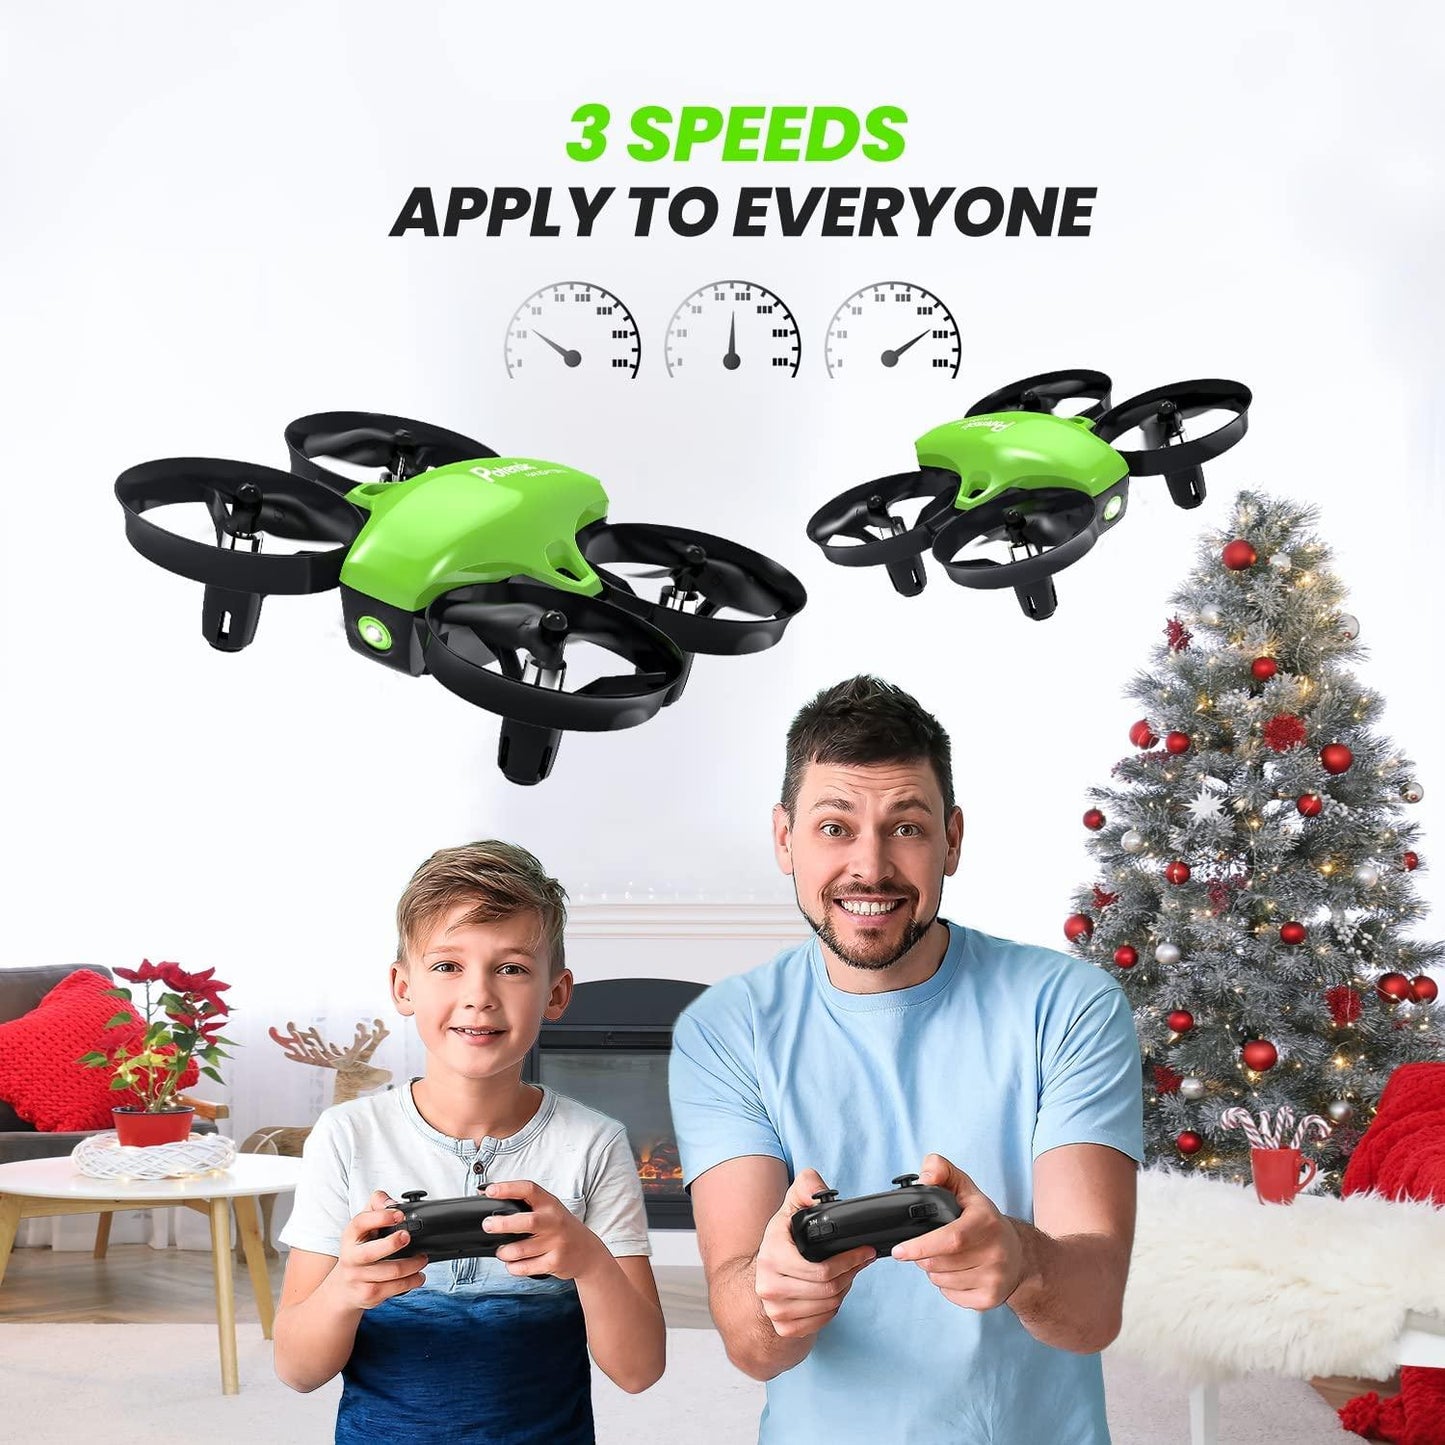 Potensic Upgraded A20 Mini Drone - Easy to Fly Even to Kids and Beginners, RC Helicopter Quadcopter with Auto Hovering, Headless Mode, 3 Batteries and Remote Control, Gift Choice for Boys and Girls - RCDrone